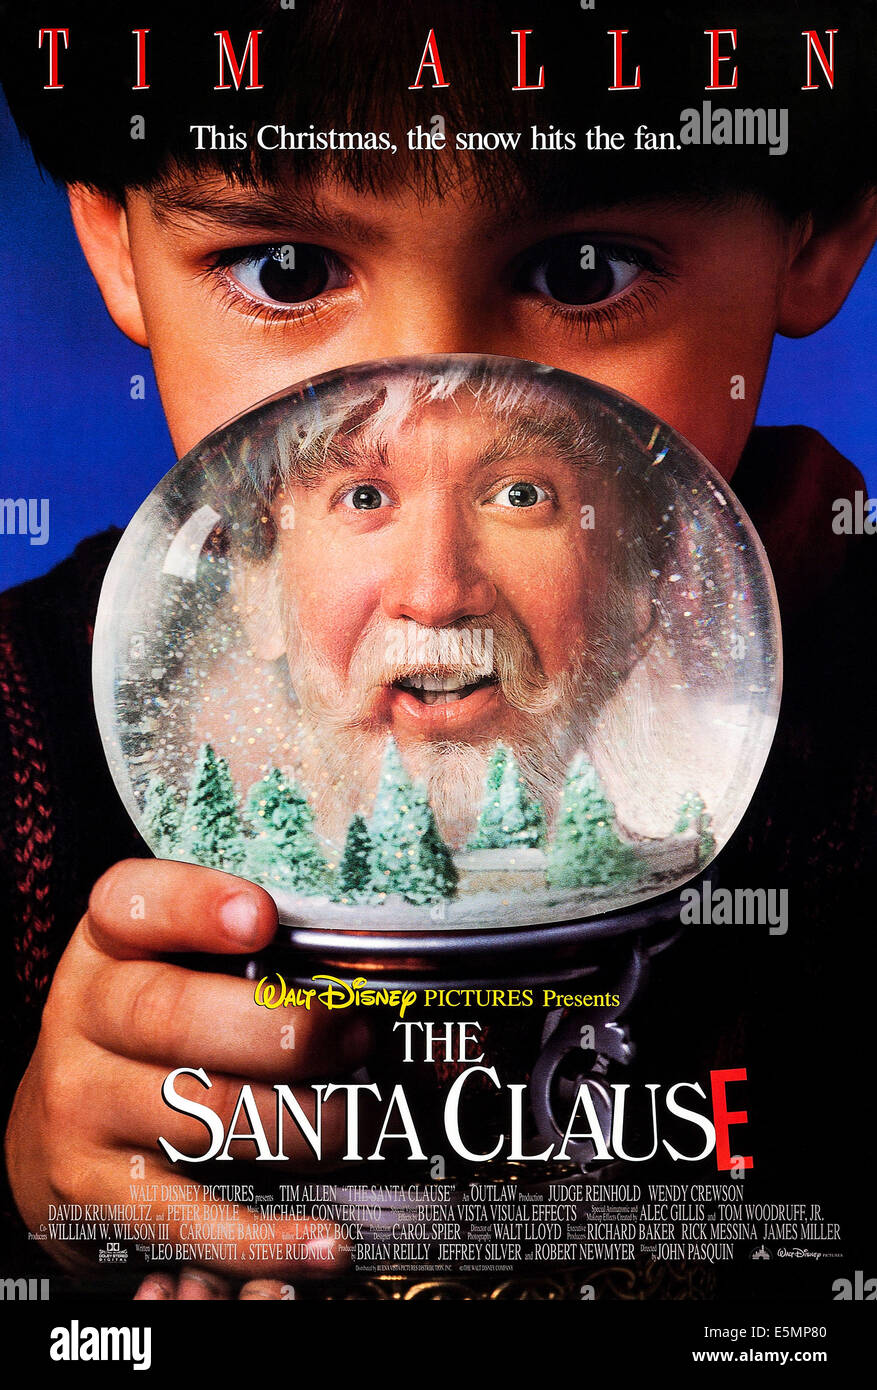 THE SANTA CLAUSE, US advance poster art, from left: Eric Lloyd, Tim Allen, 1994. ©Buena Vista/courtesy Everett Collection Stock Photo